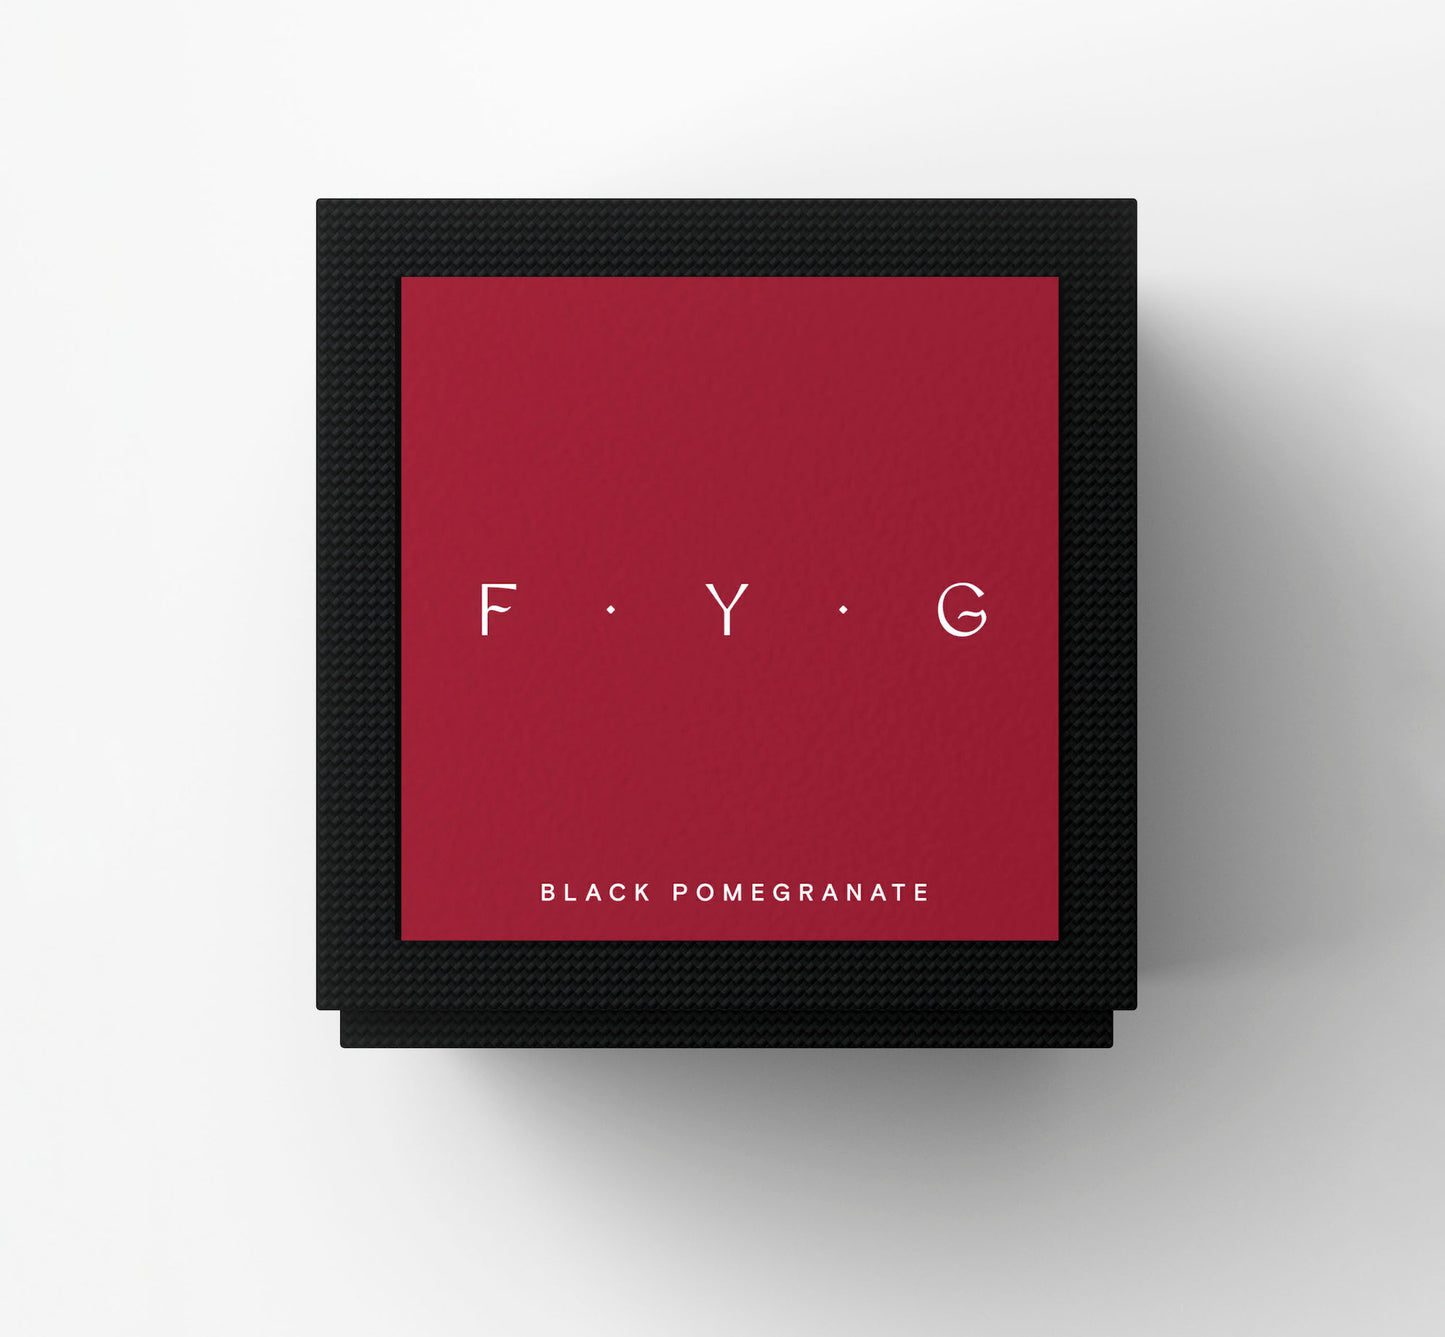 FYG Black Pomegranate Candle in box